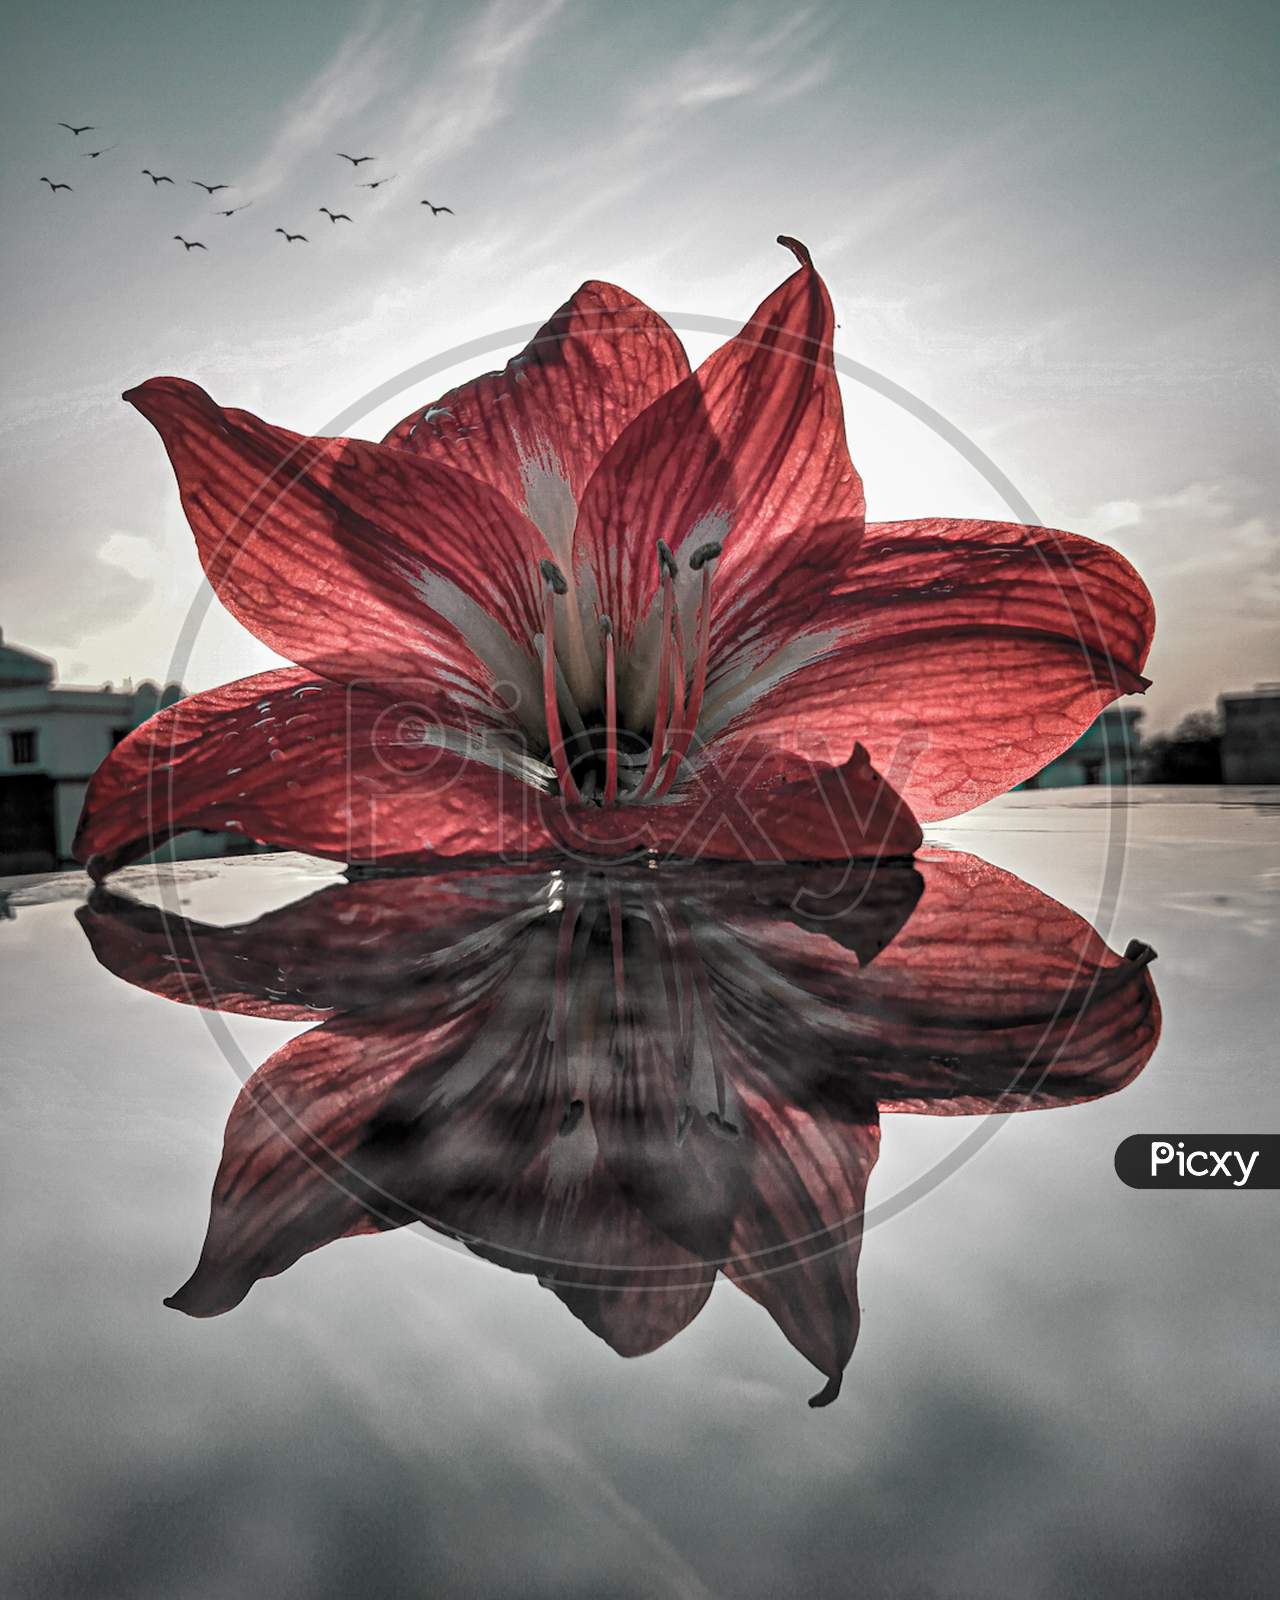 Reflection of flower